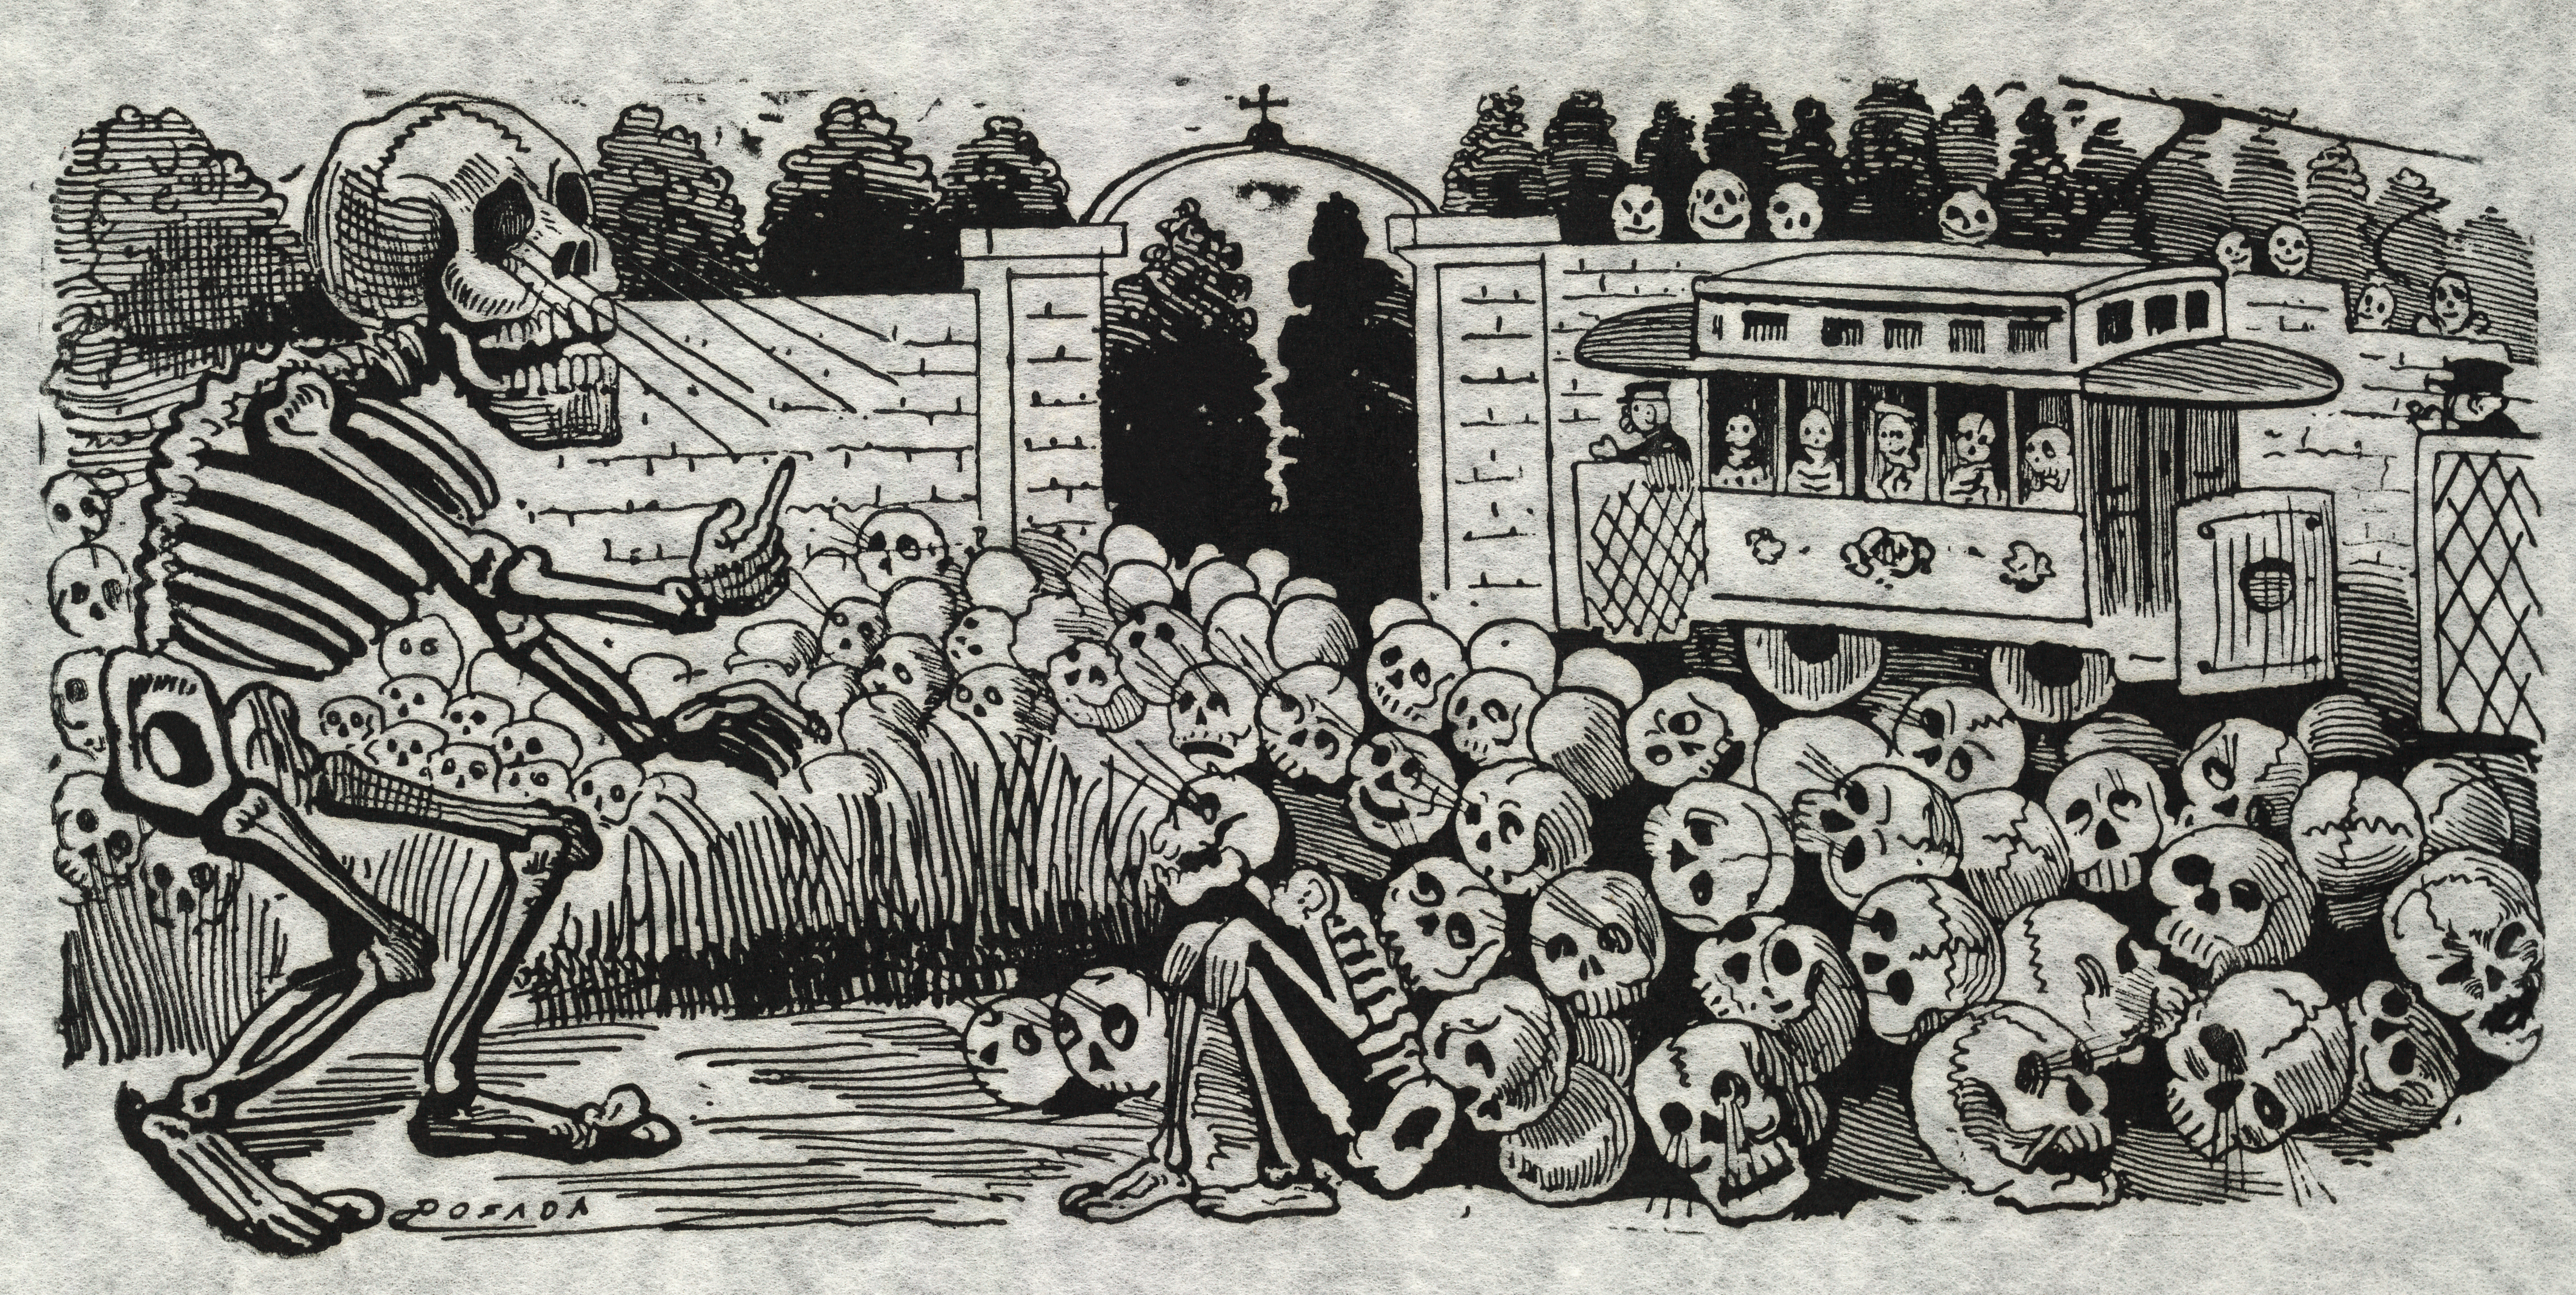 Reproduction of a black and white Jose Guadalupe Posada print. Large skeleton commanding the attention of skulls.